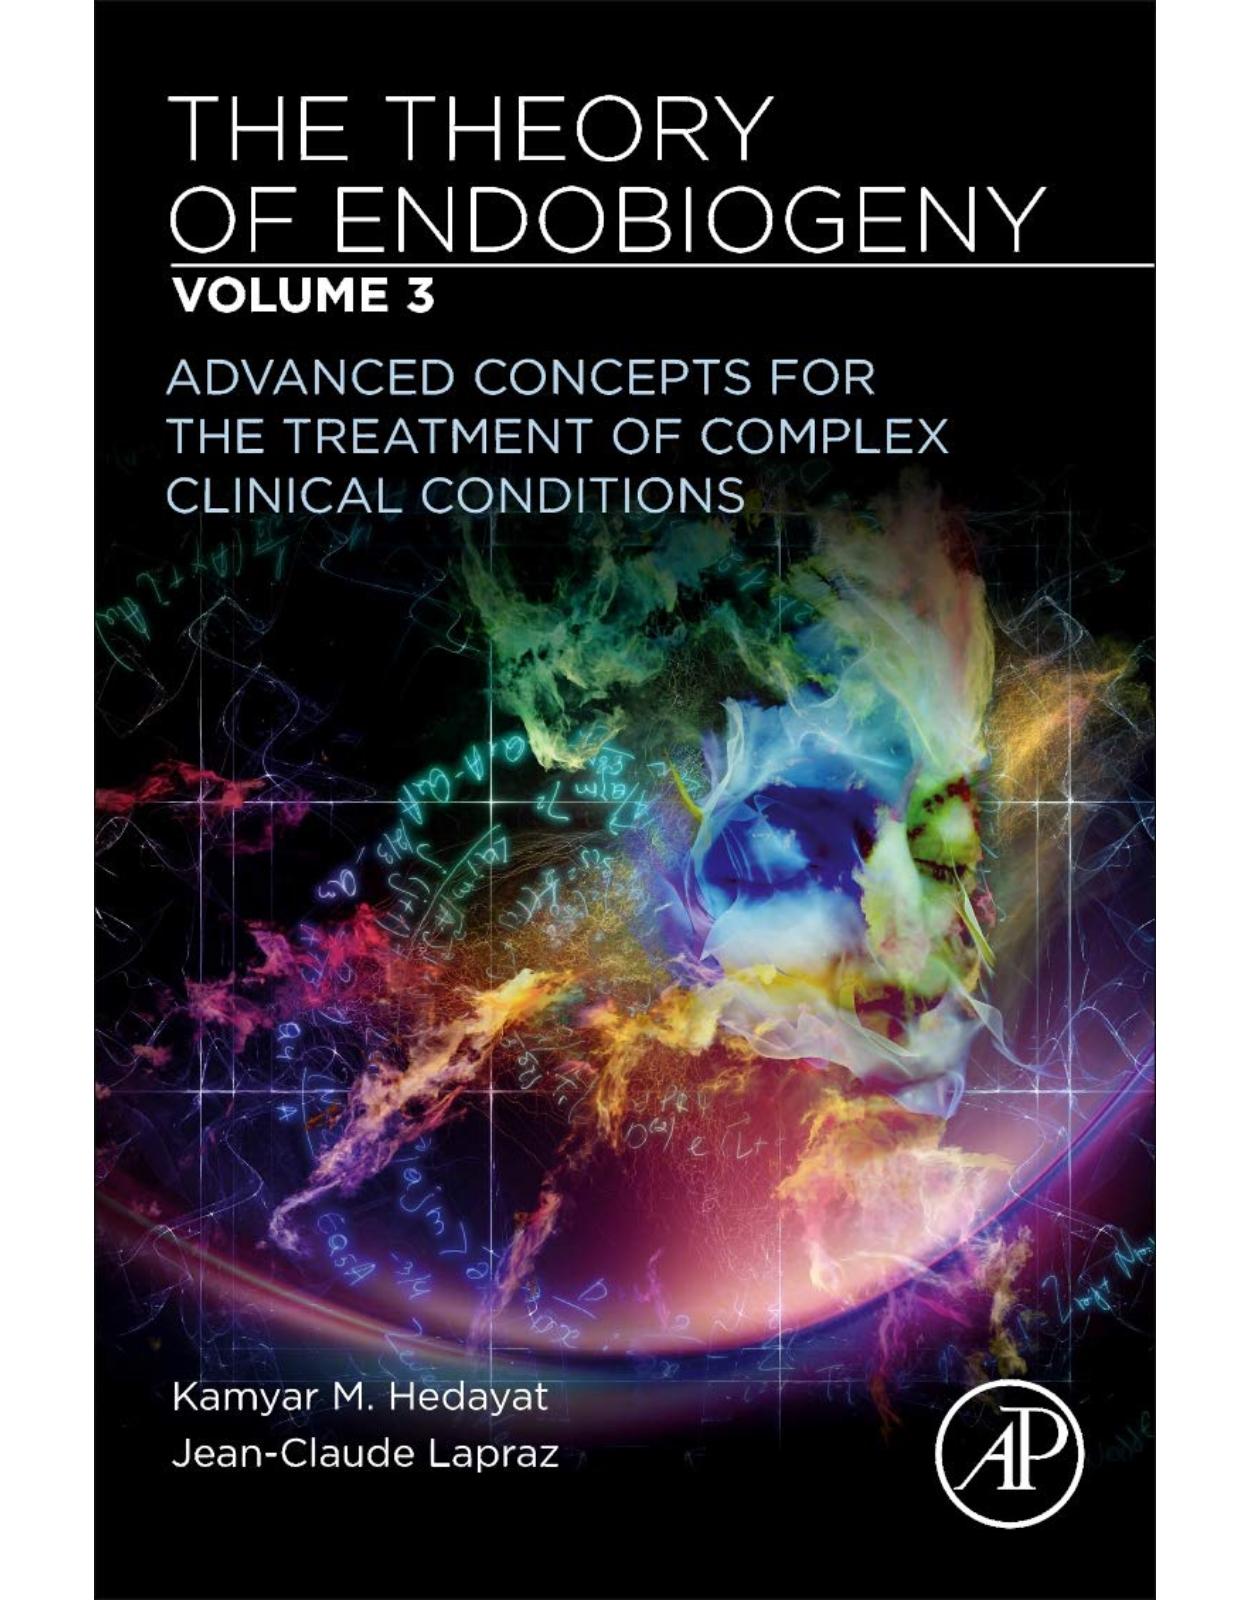 The Theory of Endobiogeny: Volume 3: Advanced Concepts for the Treatment of Complex Clinical Conditions